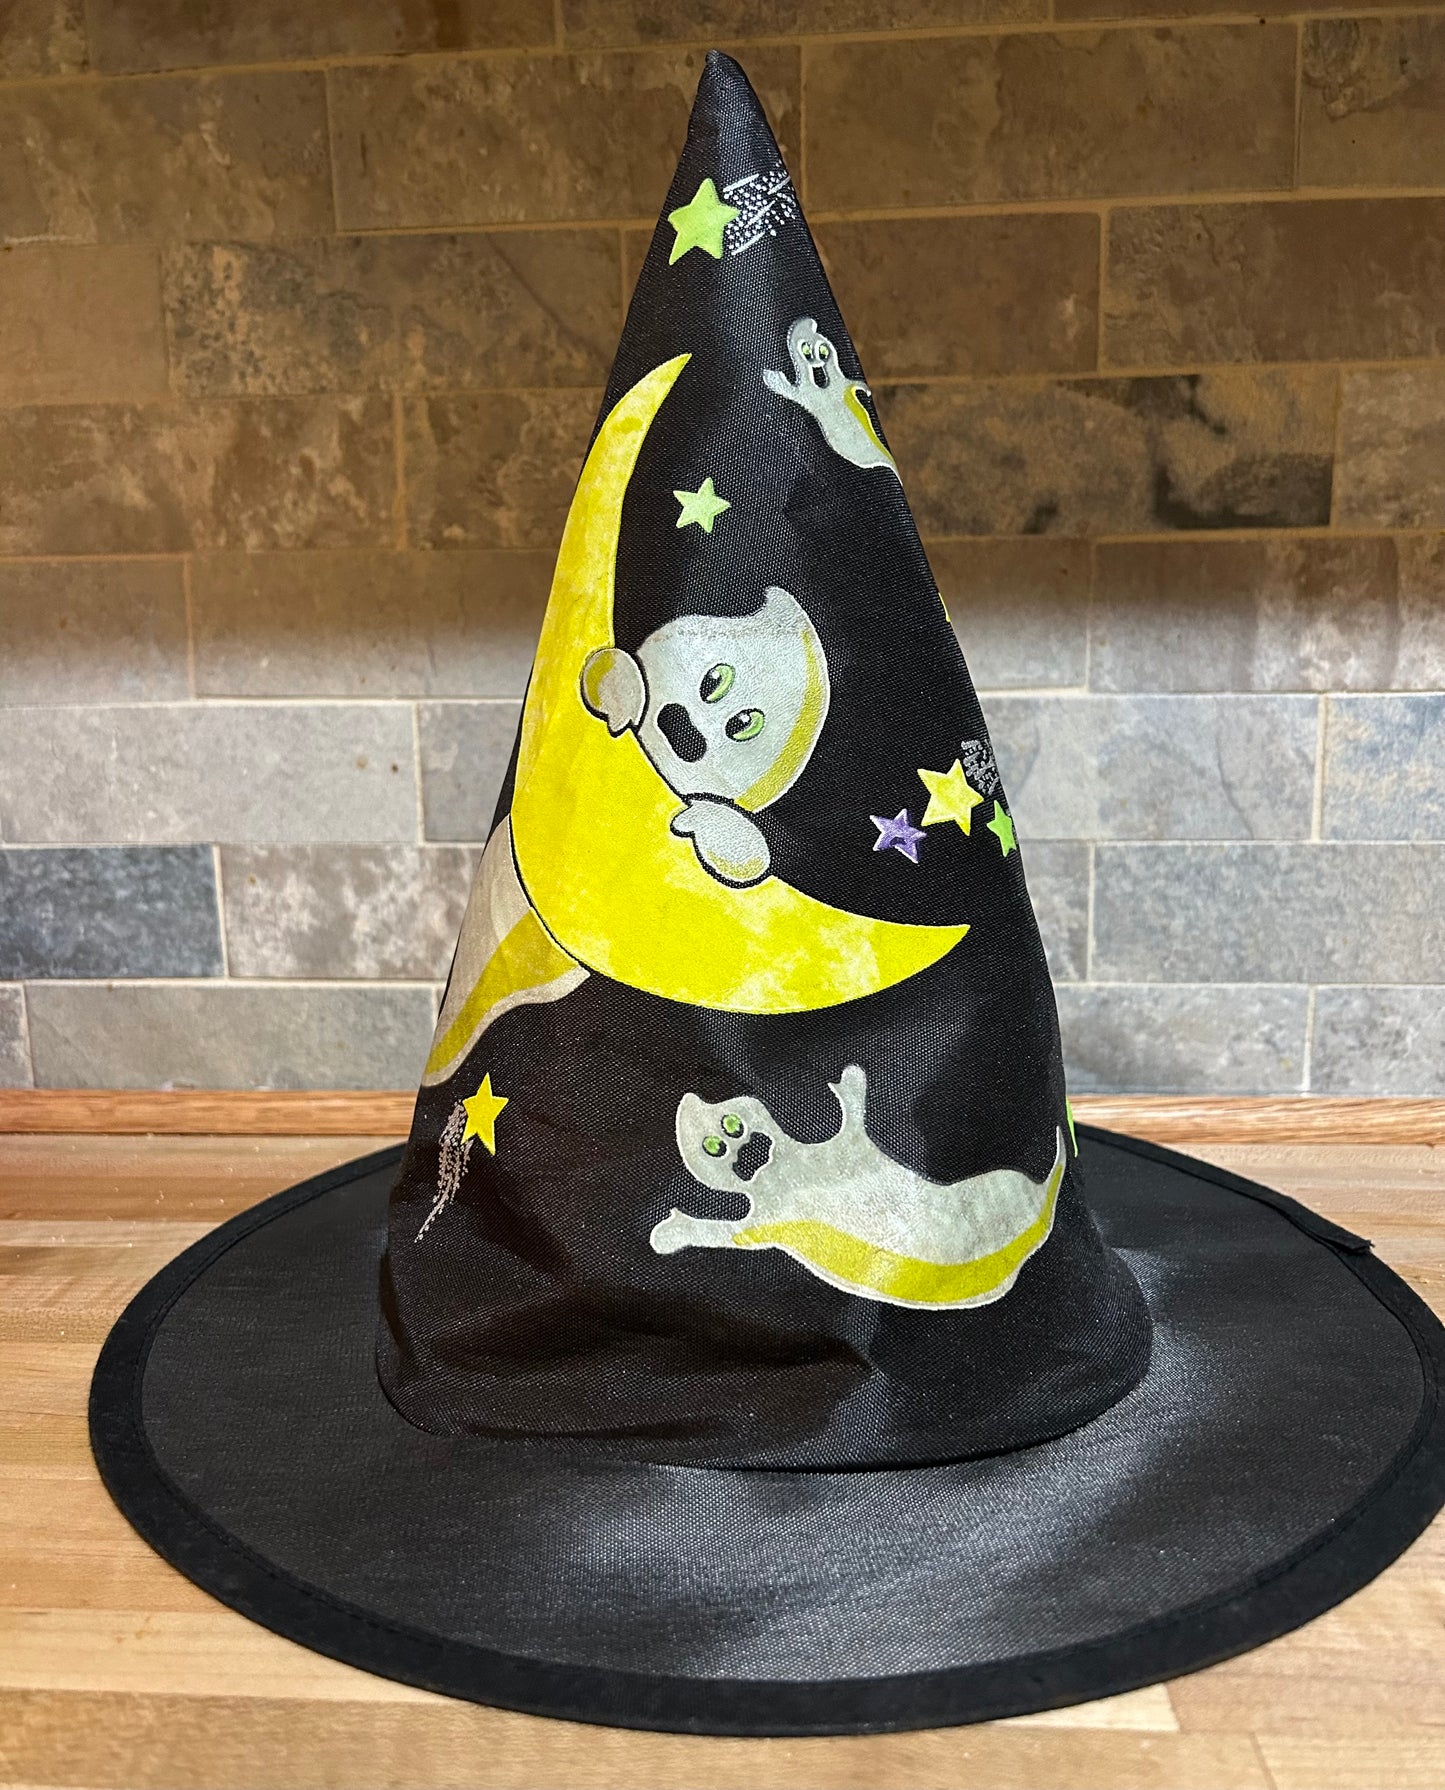 Witch Hats for Children